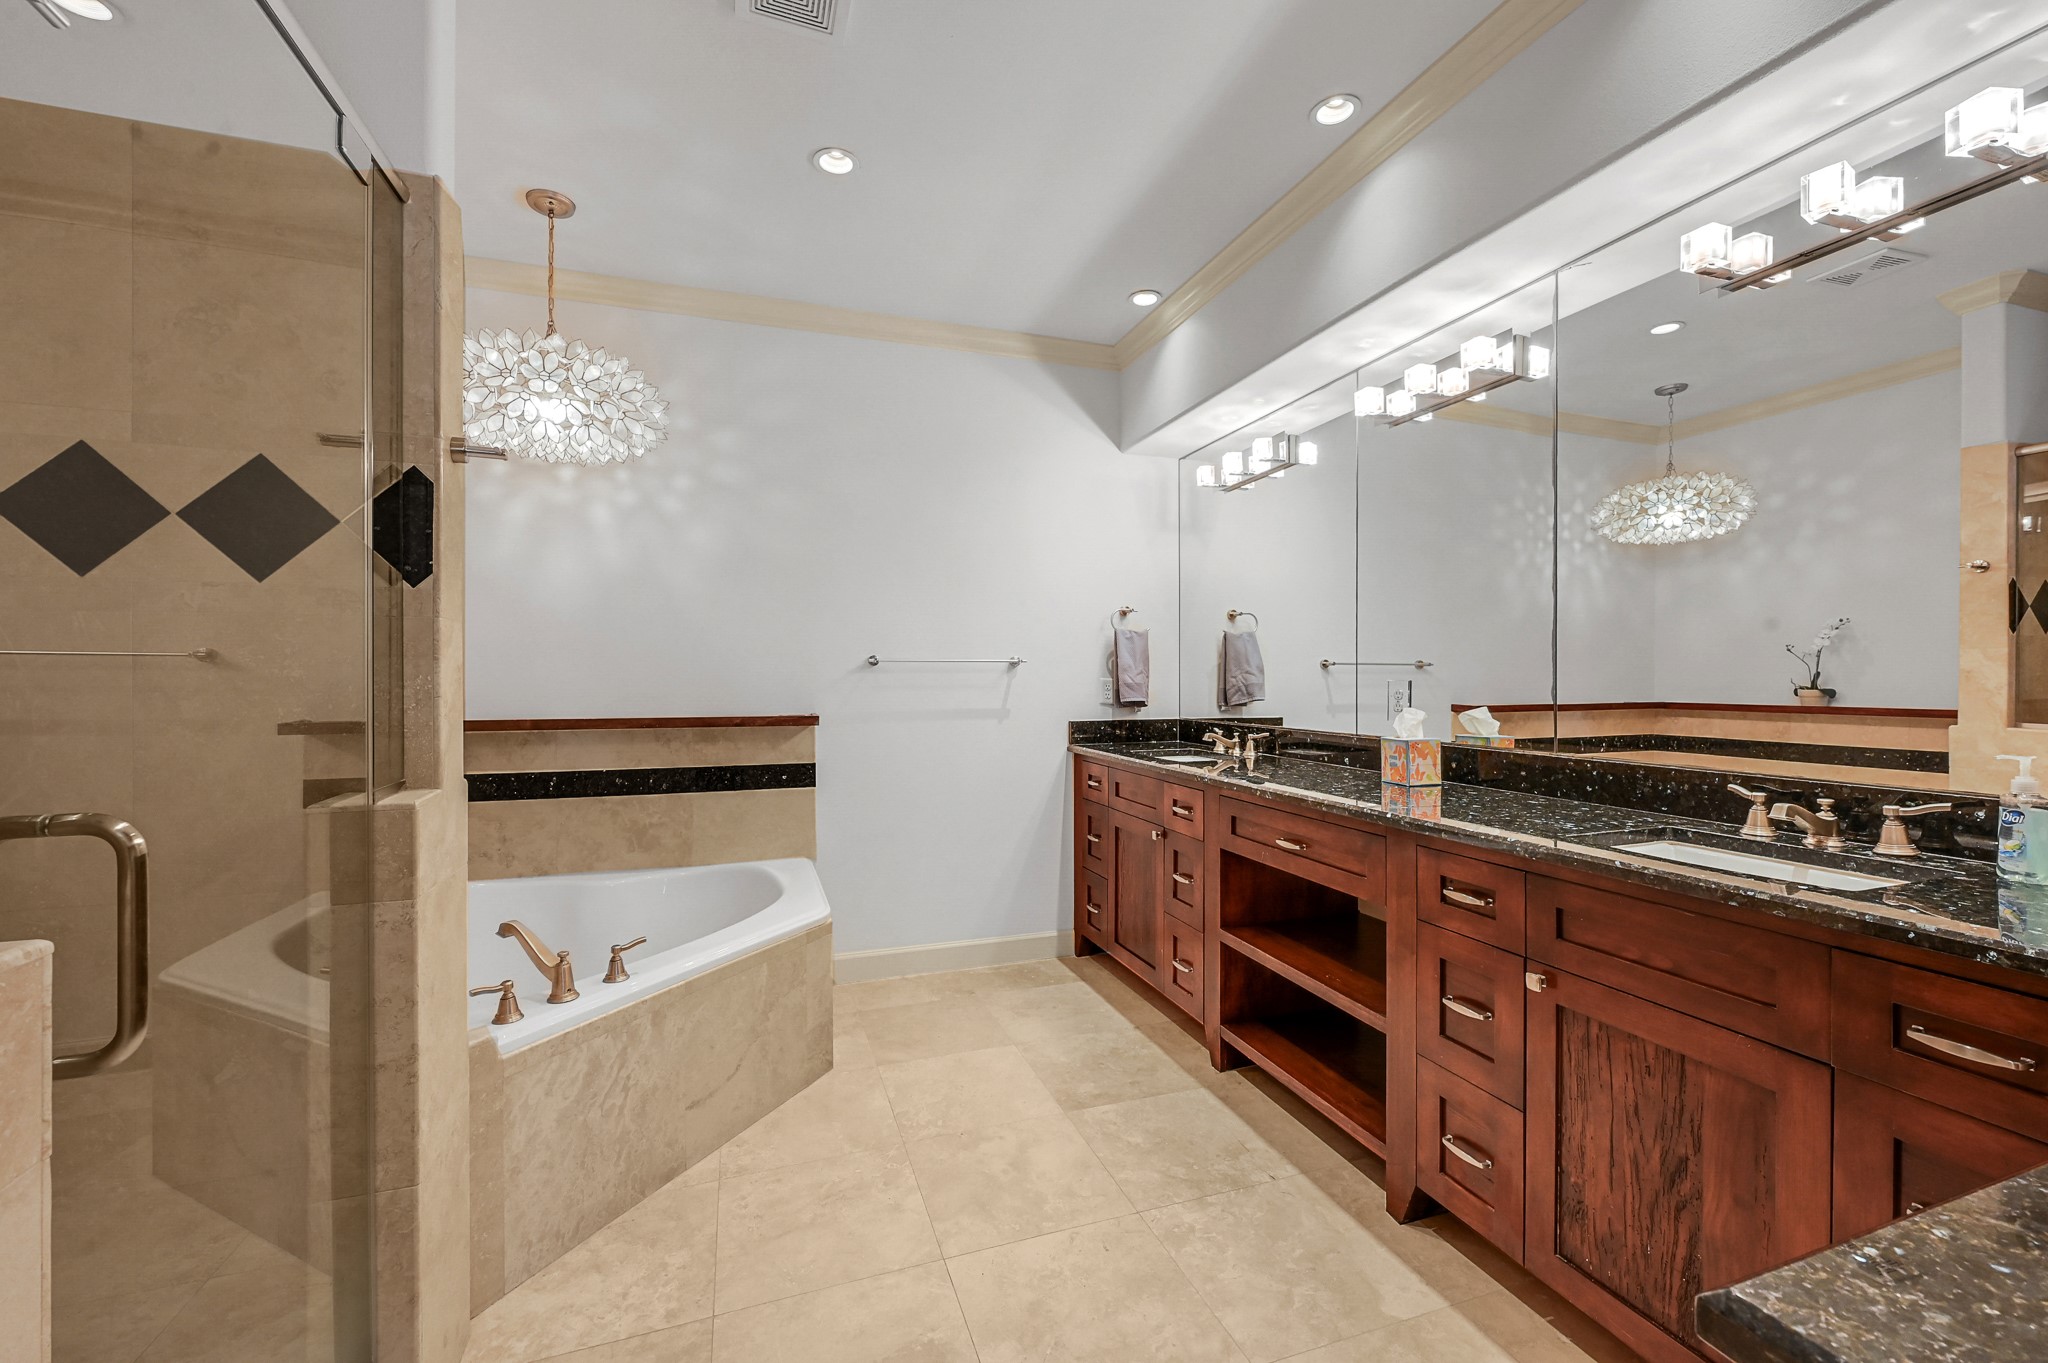 Primary bathroom with travertine flooring, double sinks, walk-in shower, and soaking tub.